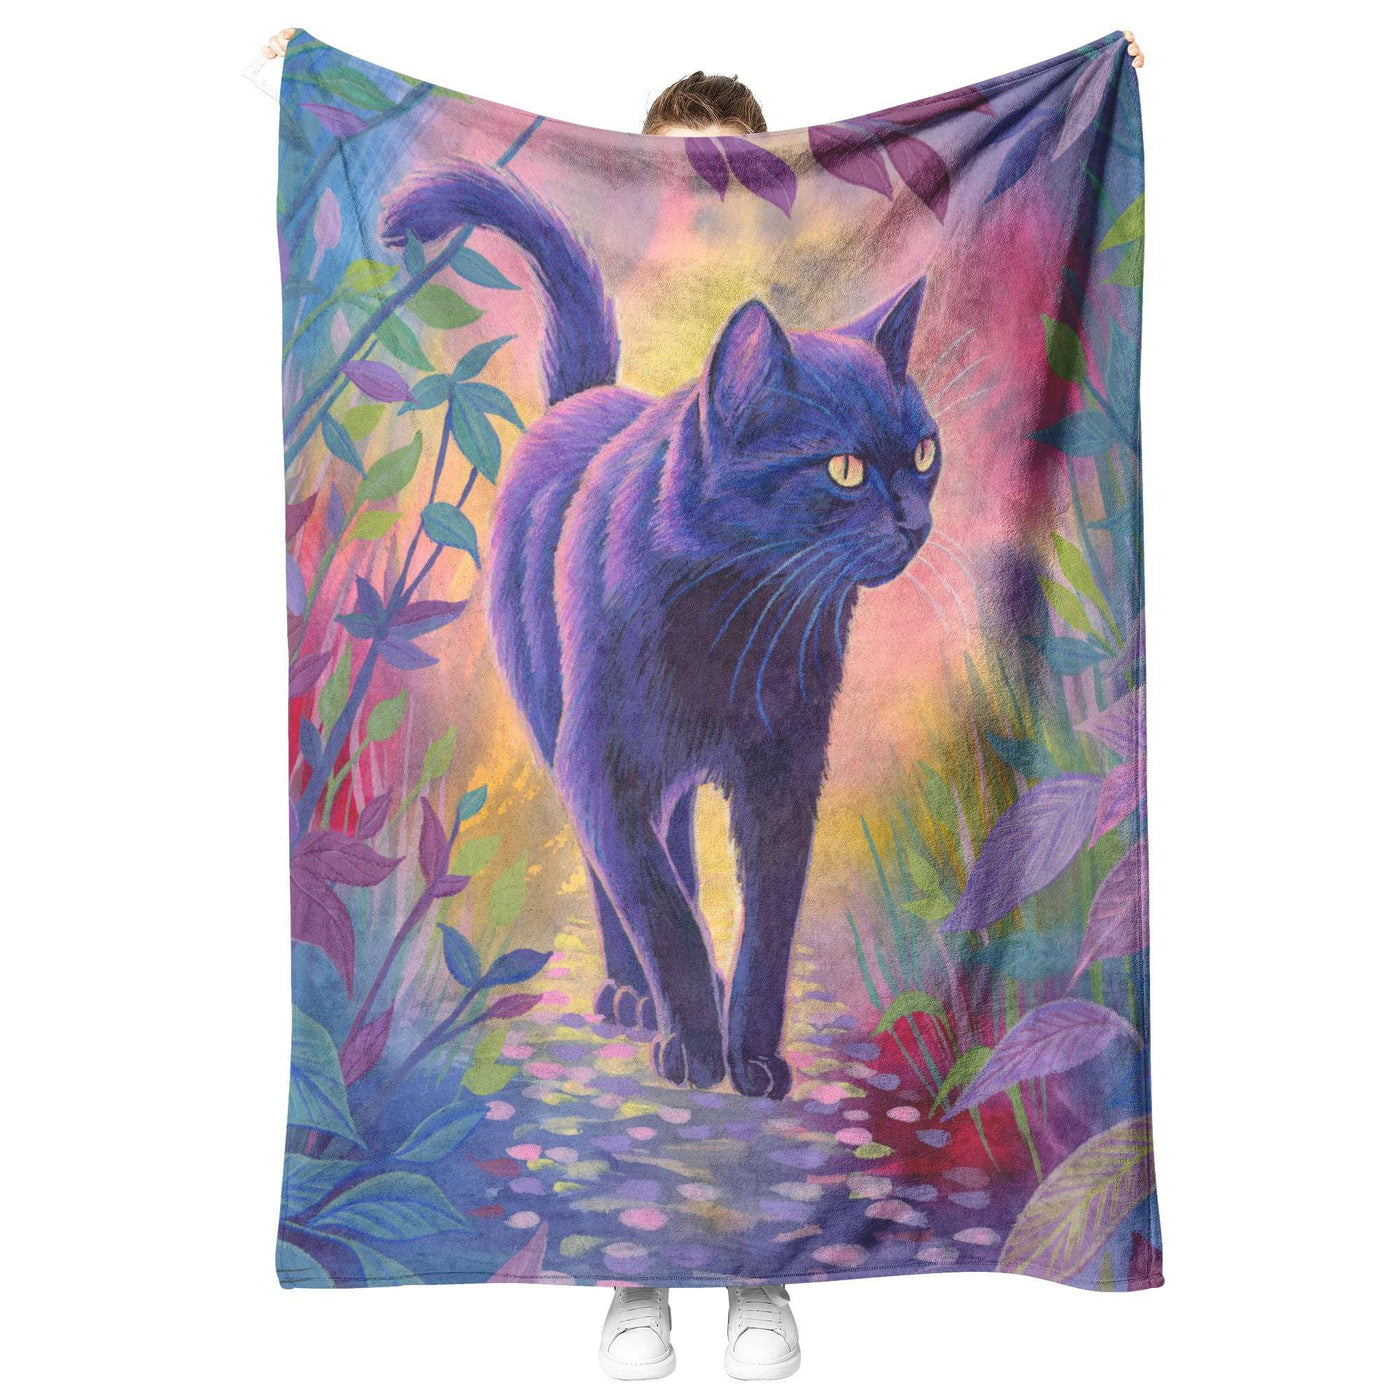 Person holding up a Cat Blanket featuring a black cat walking on a colorful path surrounded by vibrant floral designs.